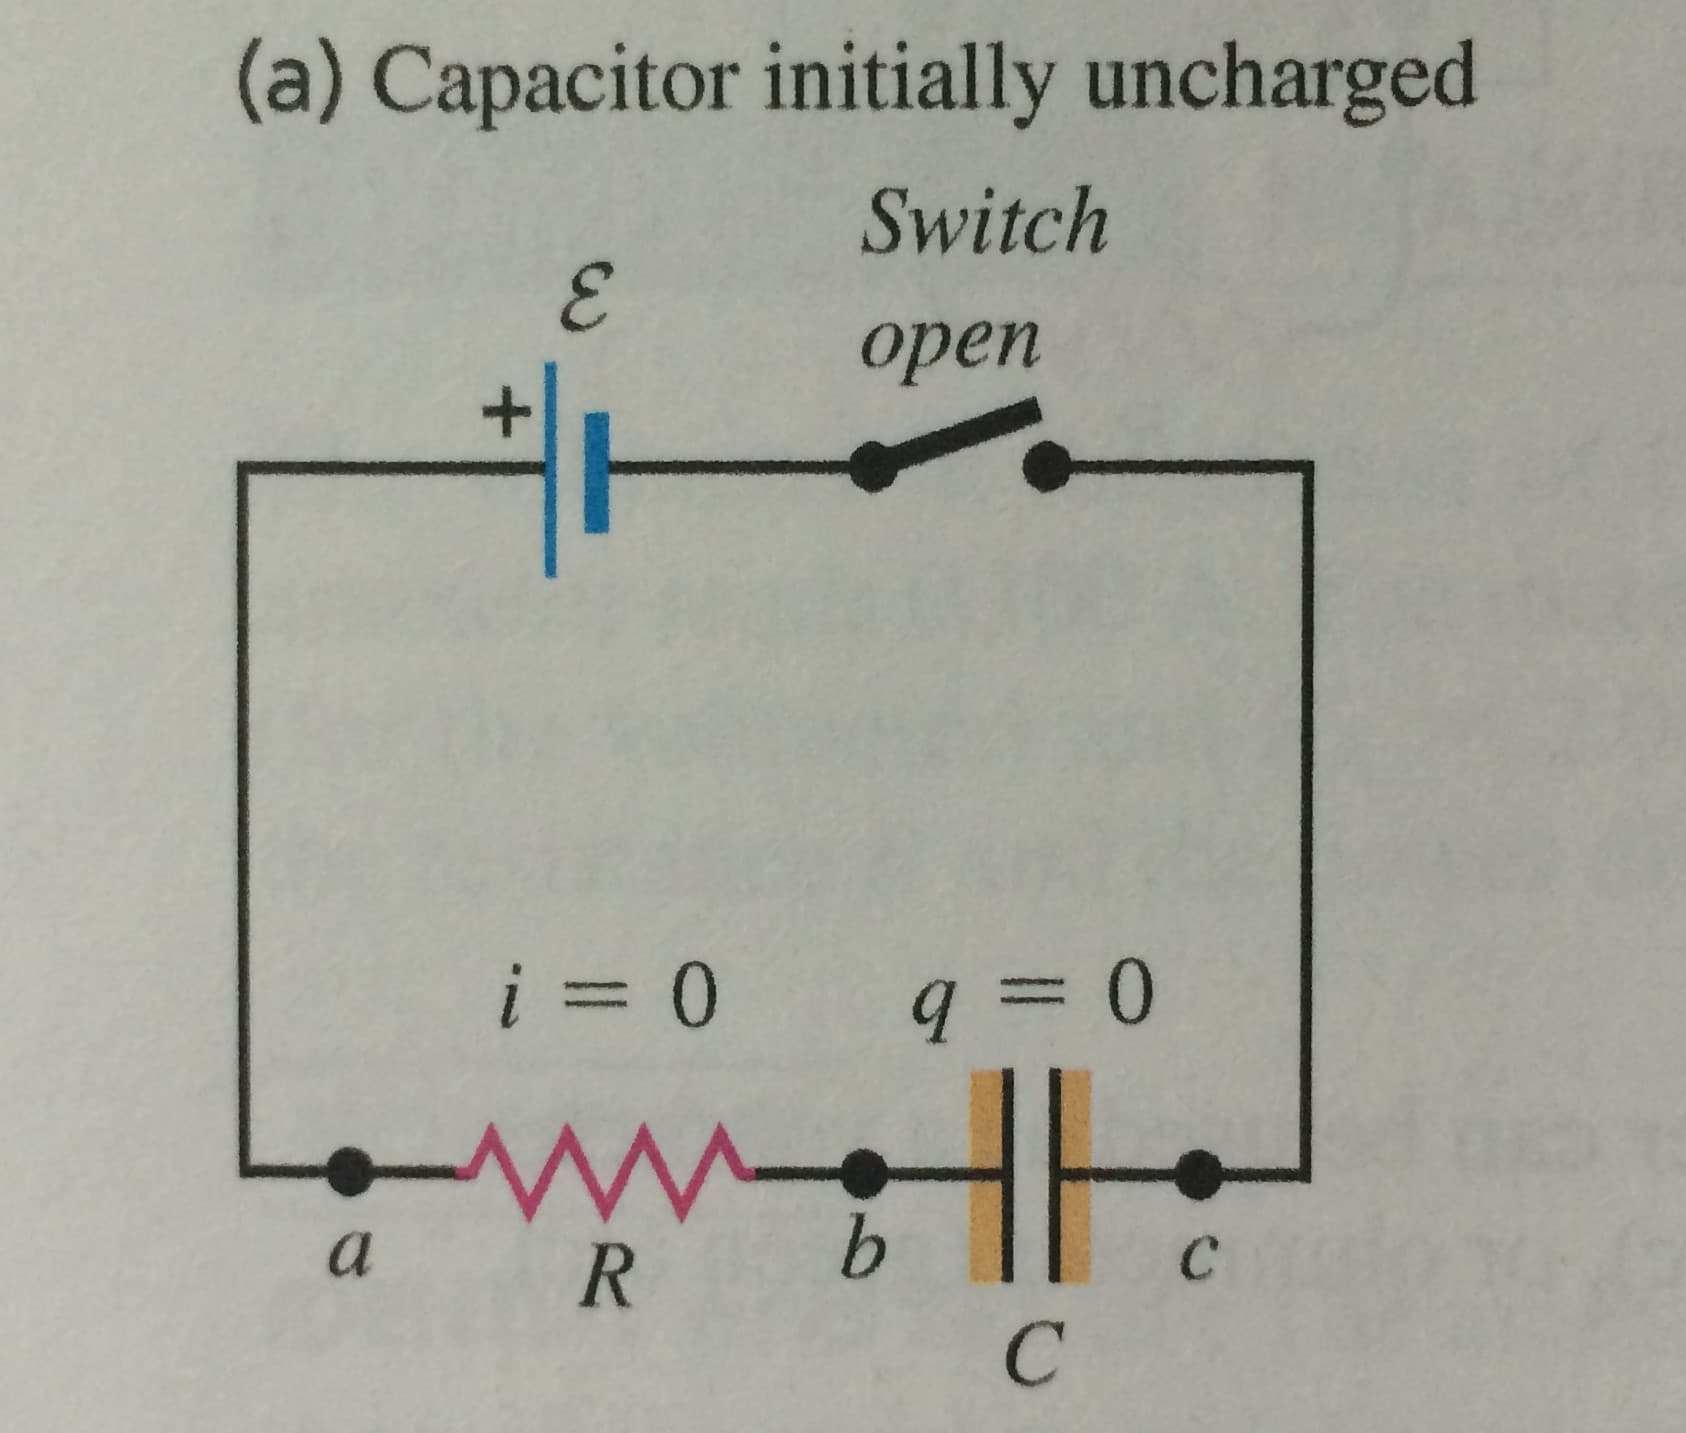 (a) Capacitor initially uncharged
Switch
орen
i 0
q 0
b
a
с
R
С
+
